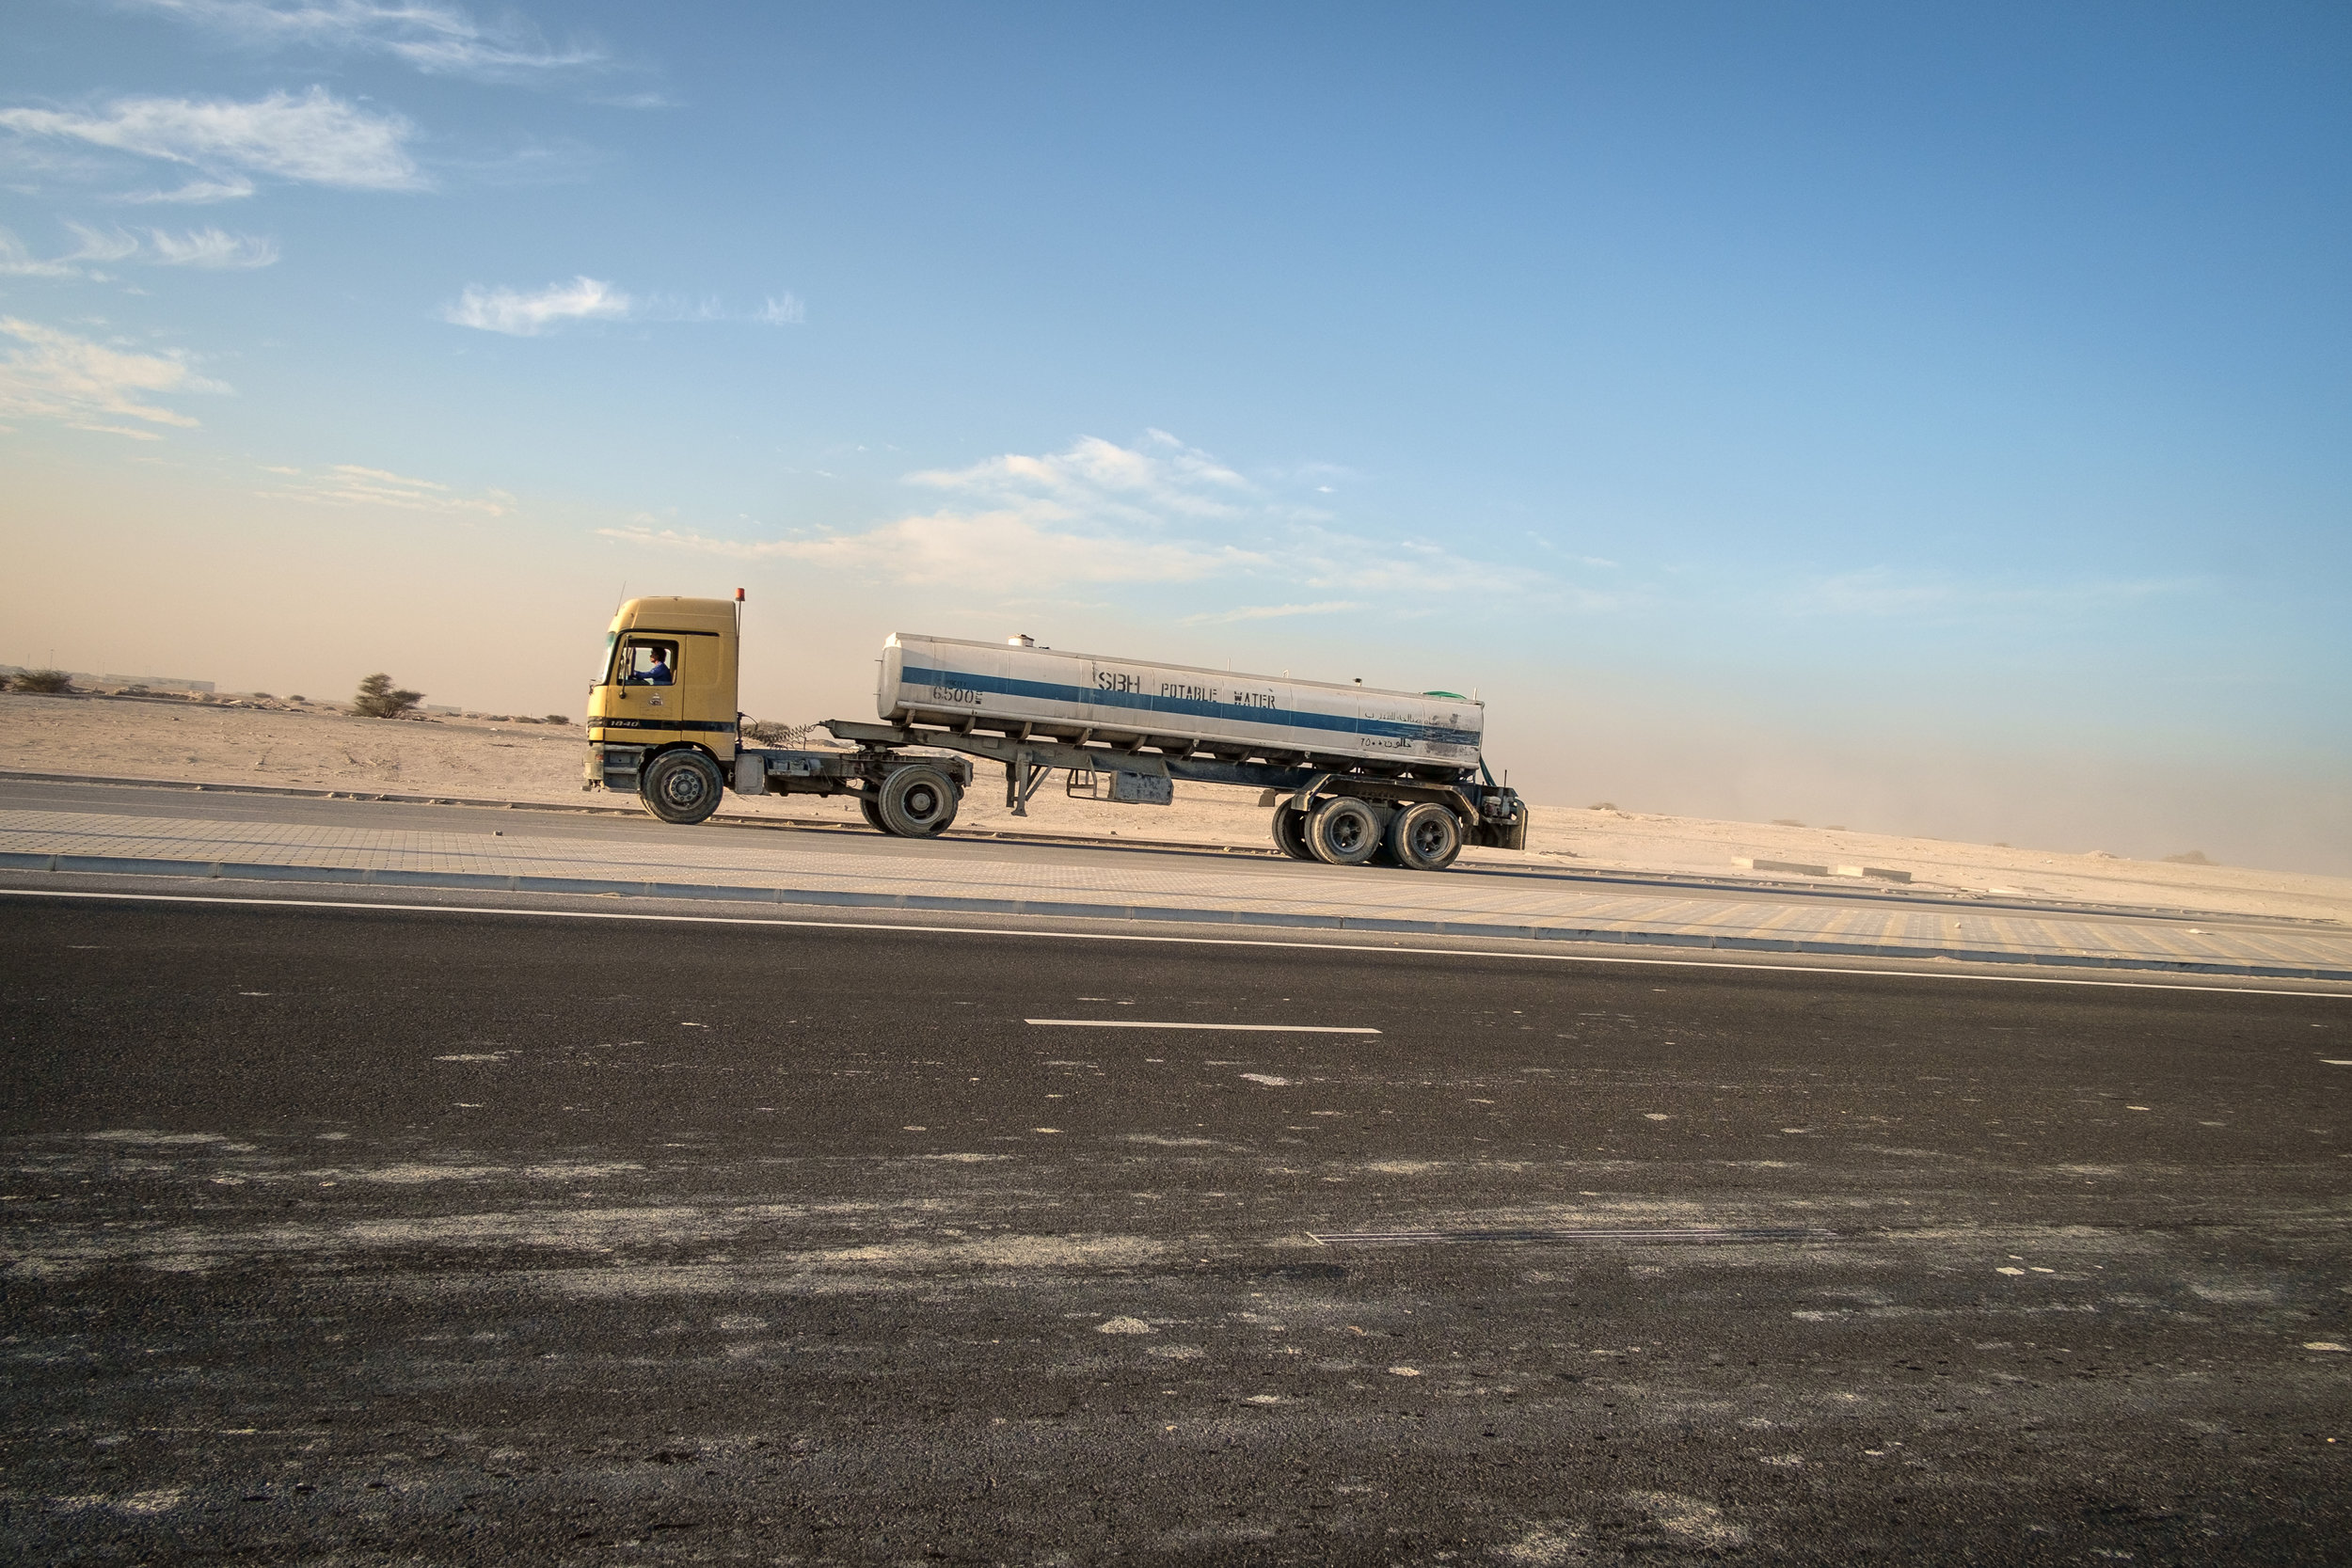  The ubiquitous semi truck, this one carrying water, is seen at sunset leaving massive construction site on the outskirts of Doha. 